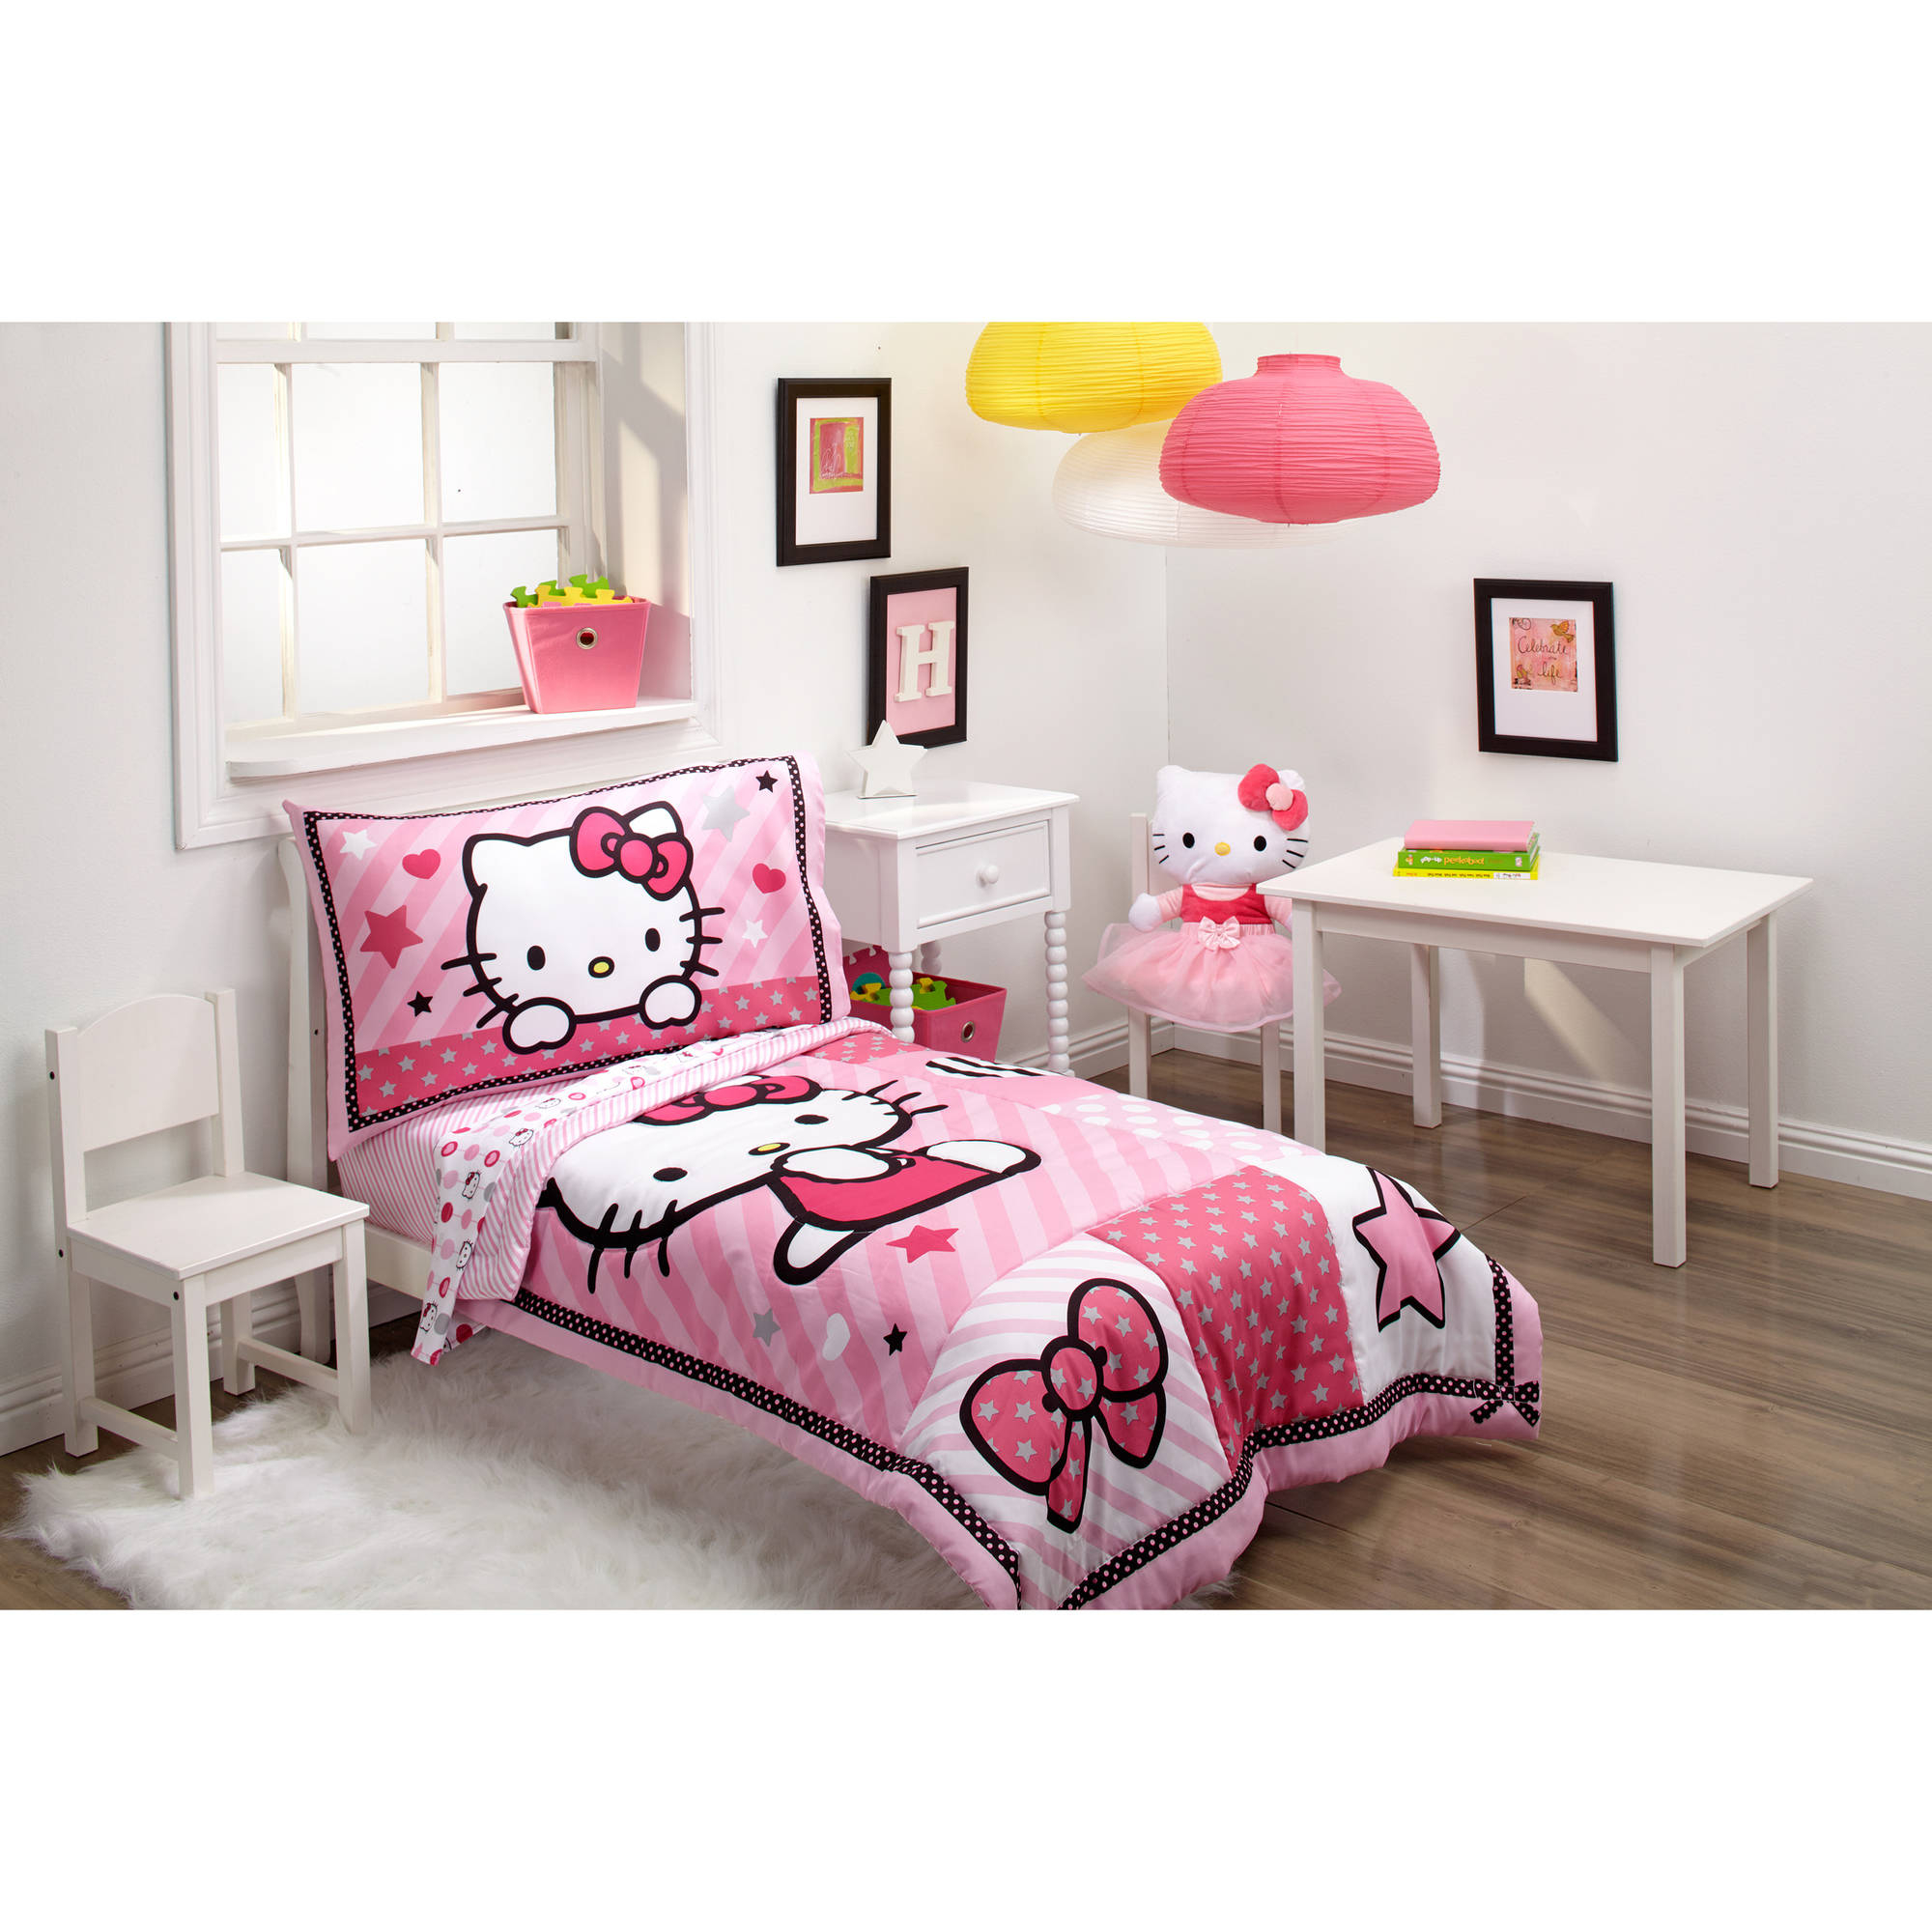 Hello Kitty Sweetheart 3 Piece Toddler Bedding Set With Bonus Matching Pillow Case intended for dimensions 2000 X 2000